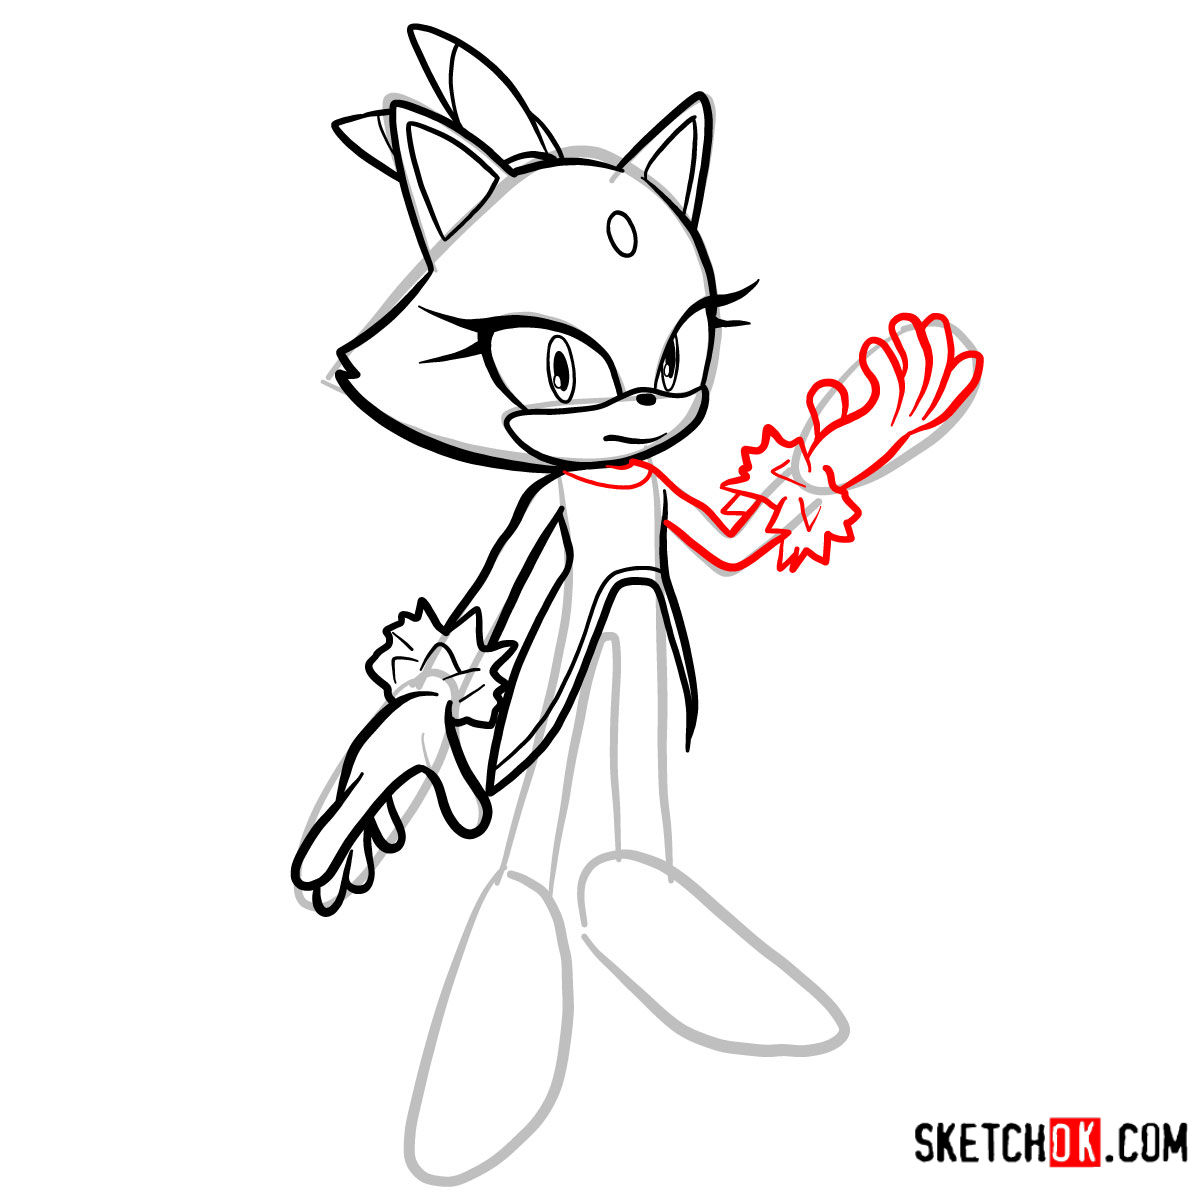 How to draw Blaze the Cat Sonic the Hedgehog - step 07.